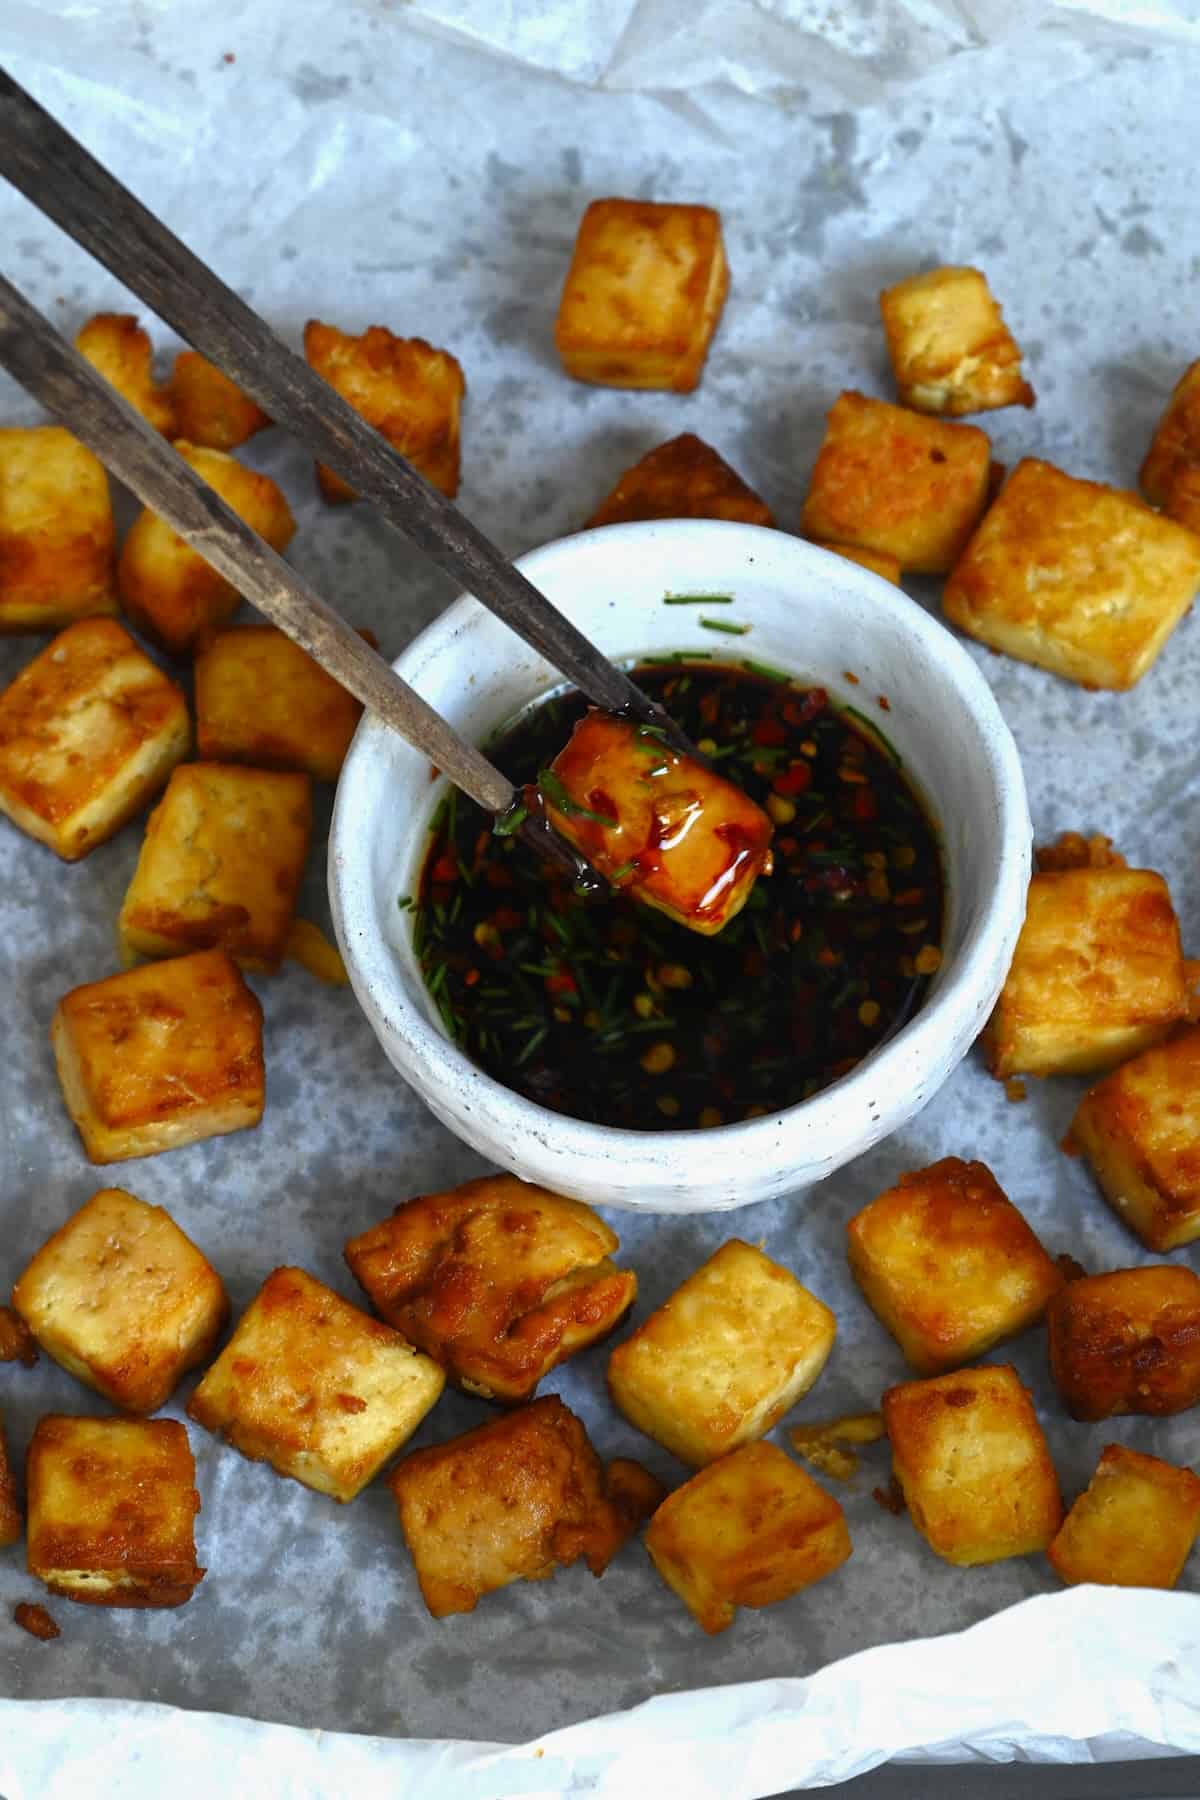 Dipping crispy tofu cube in soy sauce